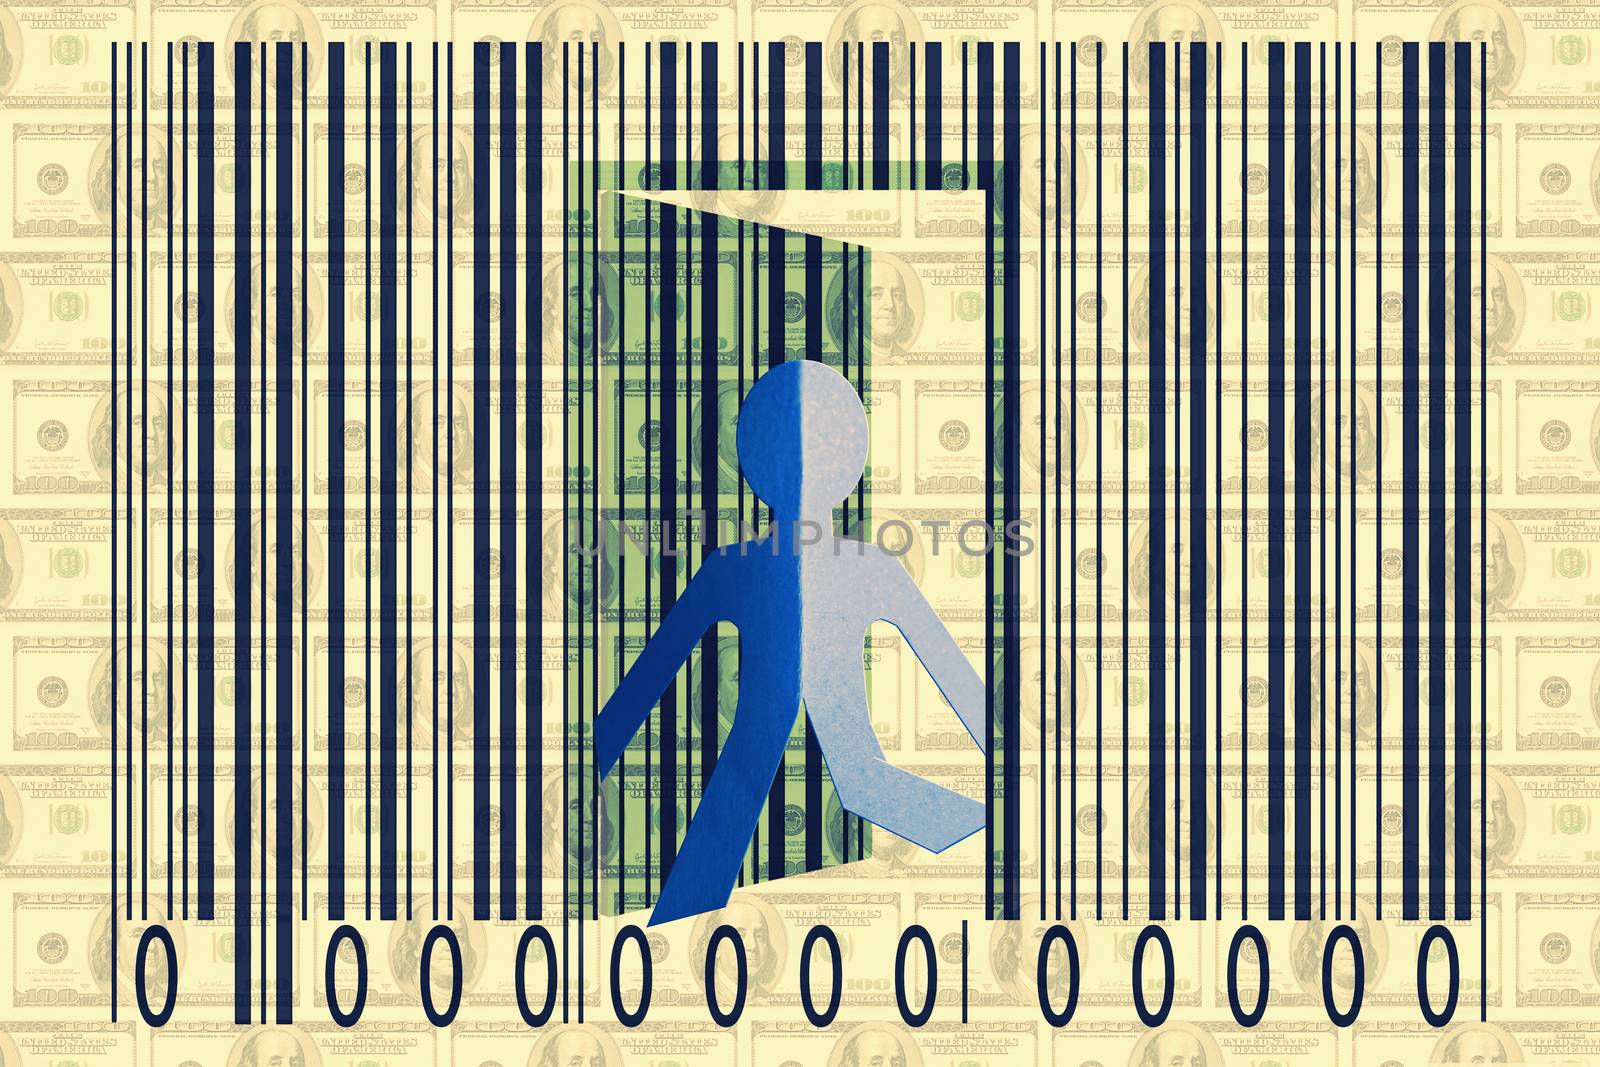 Paperman coming out of a bar code with Dollars as Backround by yands